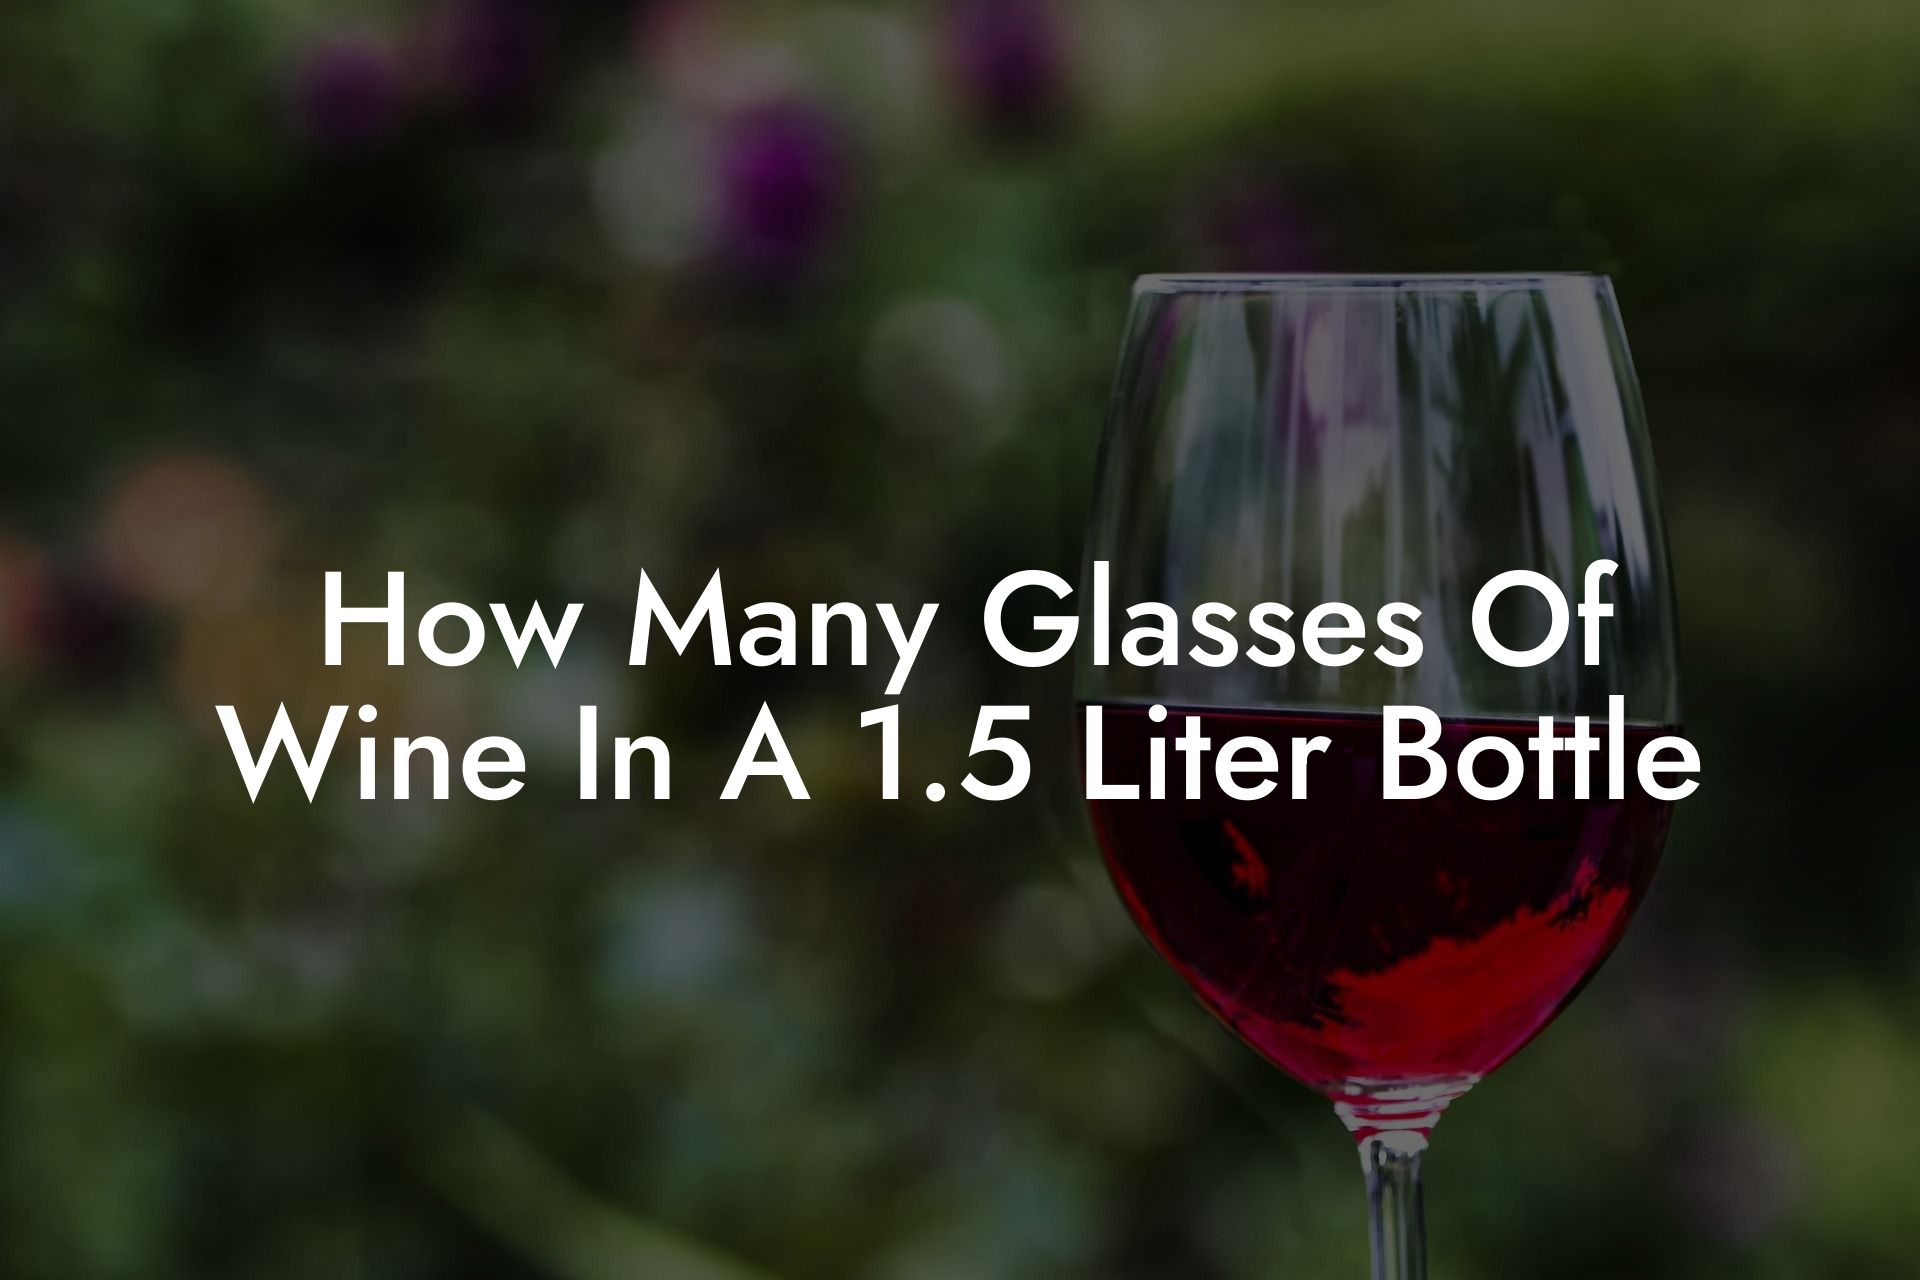 How Many Glasses Of Wine In A 1.5 Liter Bottle